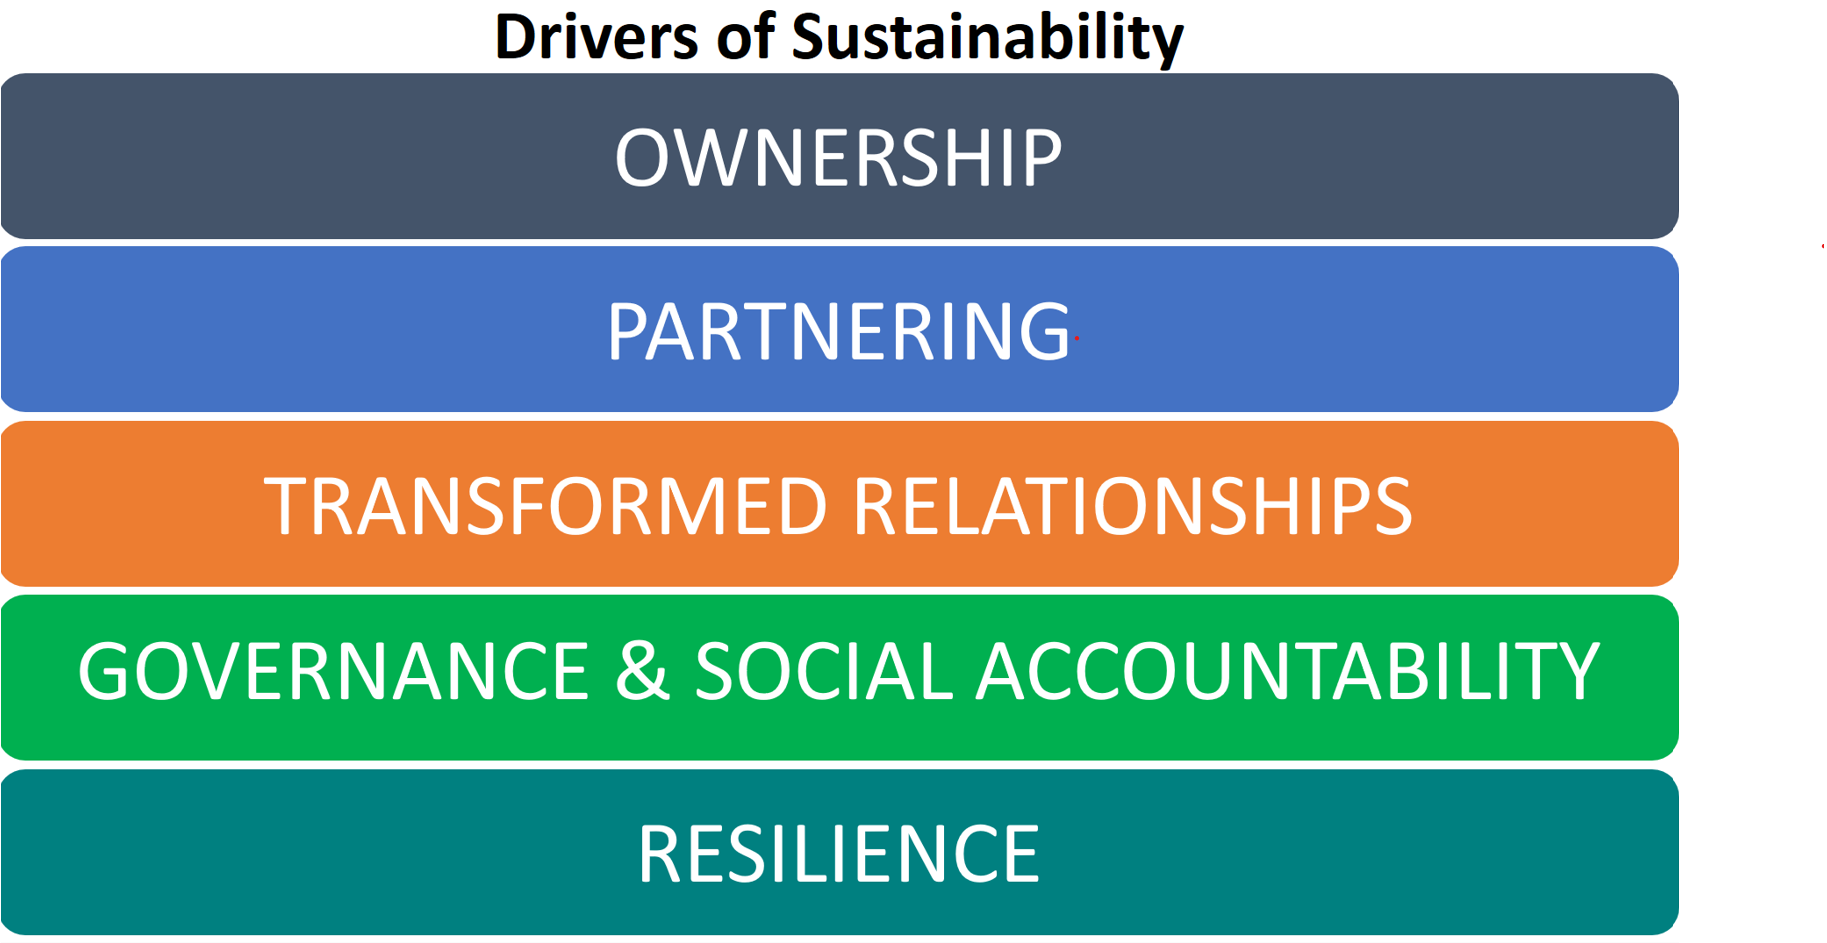 Drivers of sustainability image 